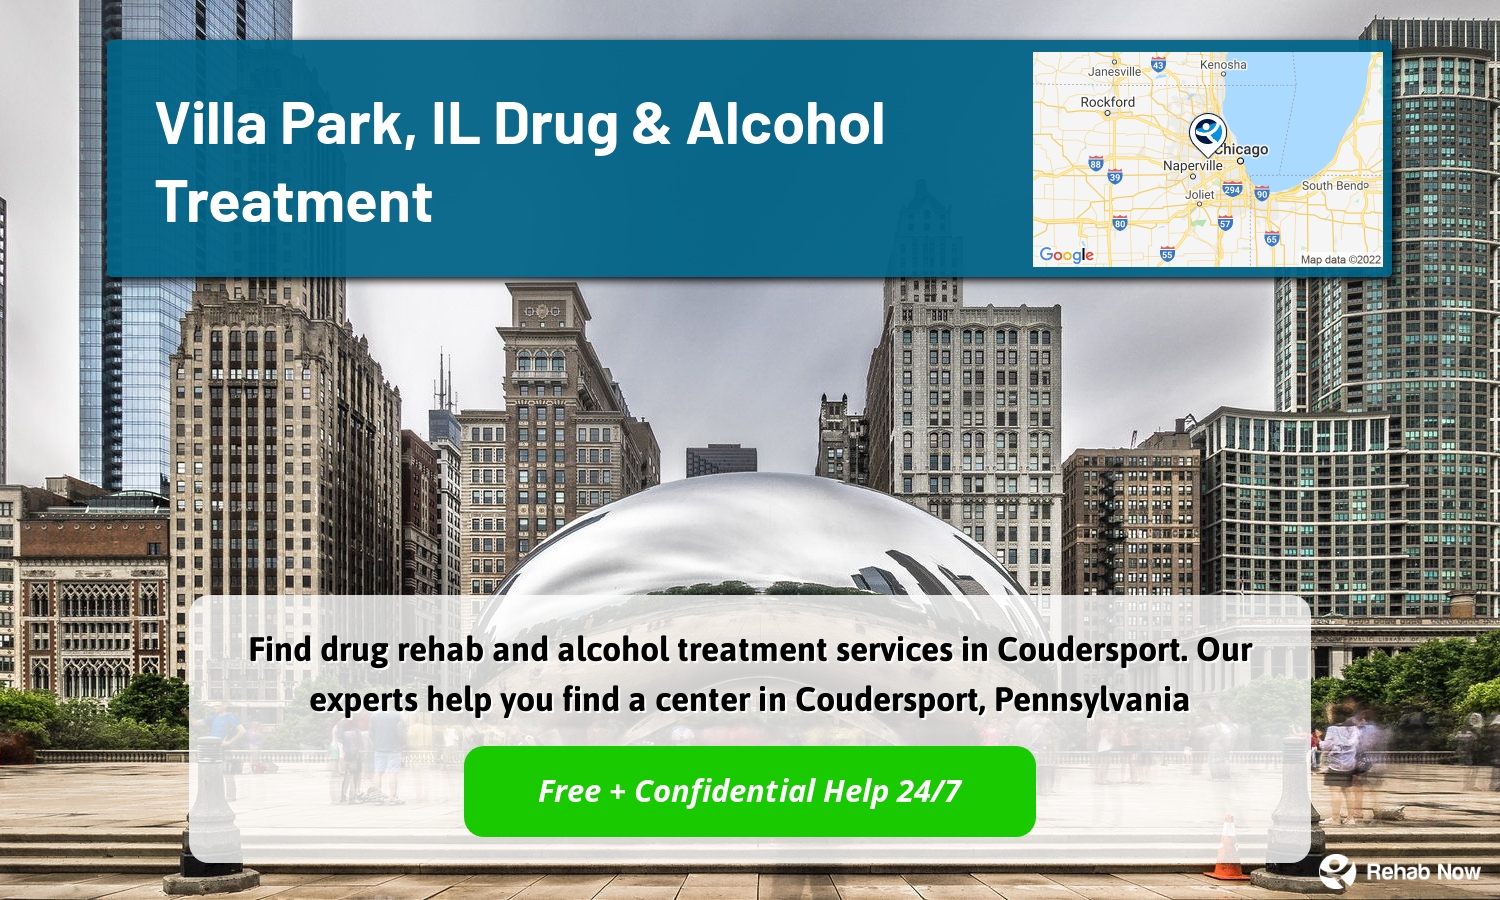 Find drug rehab and alcohol treatment services in Coudersport. Our experts help you find a center in Coudersport, Pennsylvania